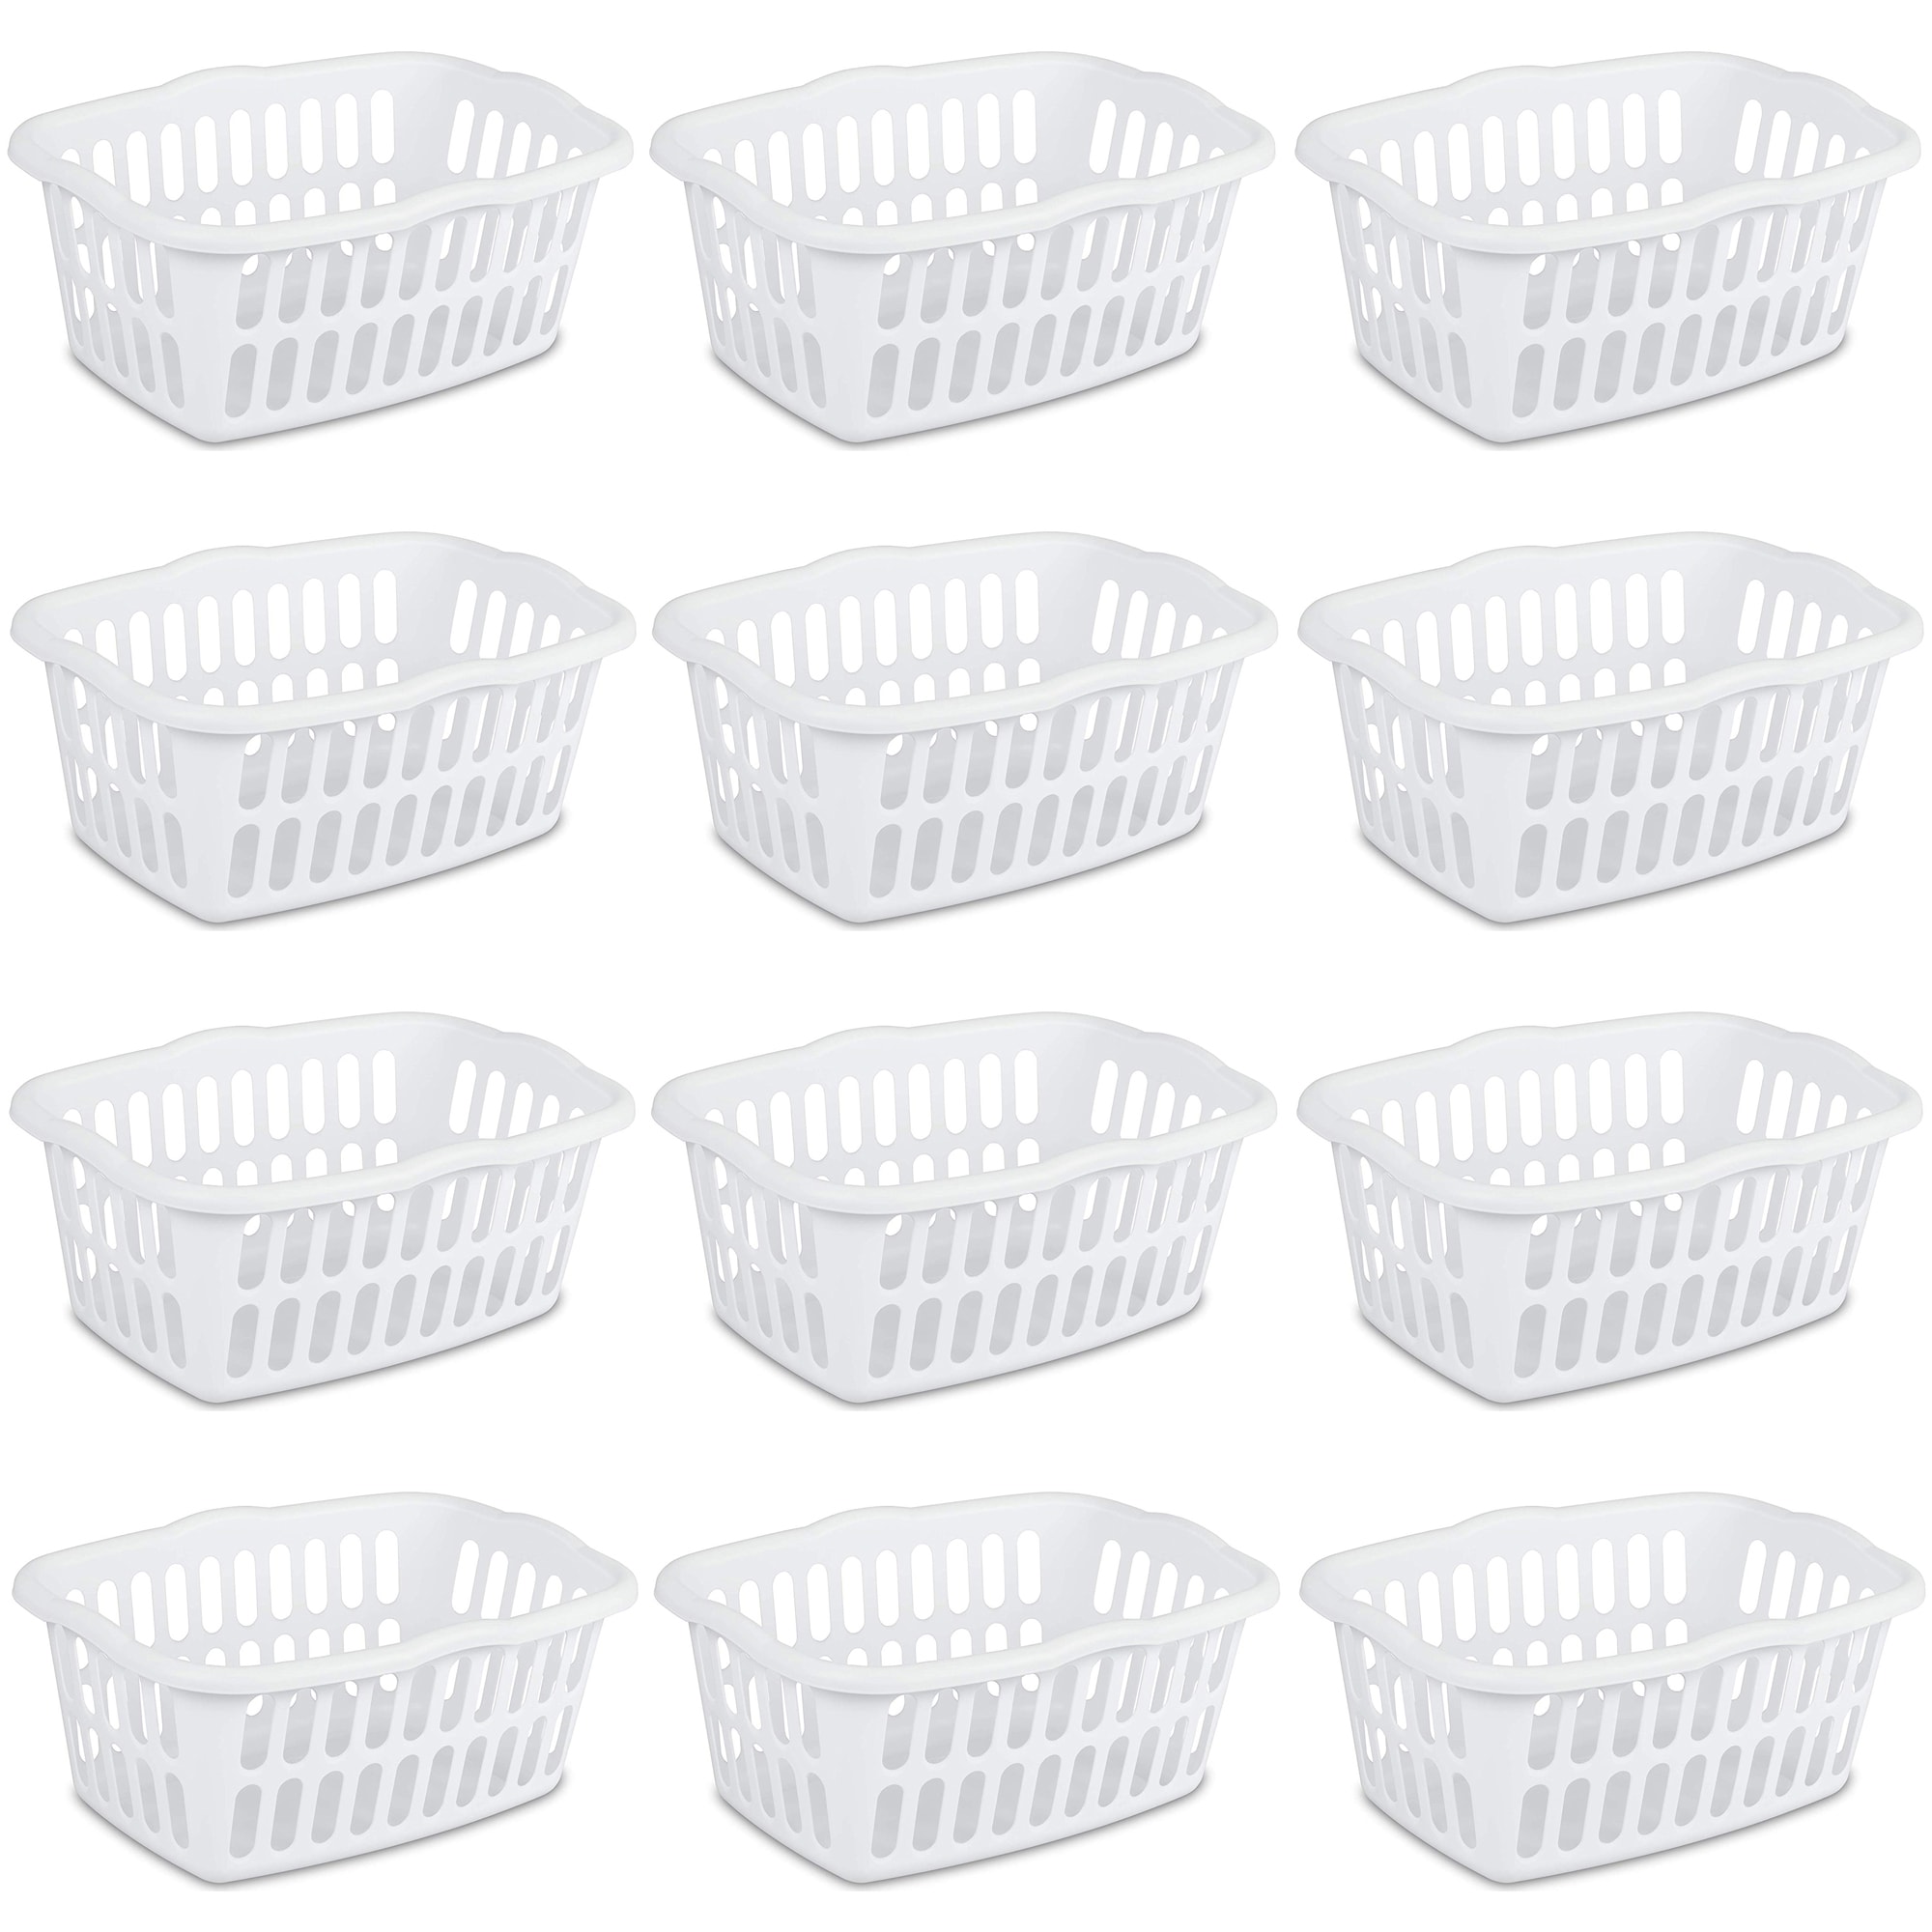 Christmas Sentiment Oval Buckets, Plastic Basket with Handles